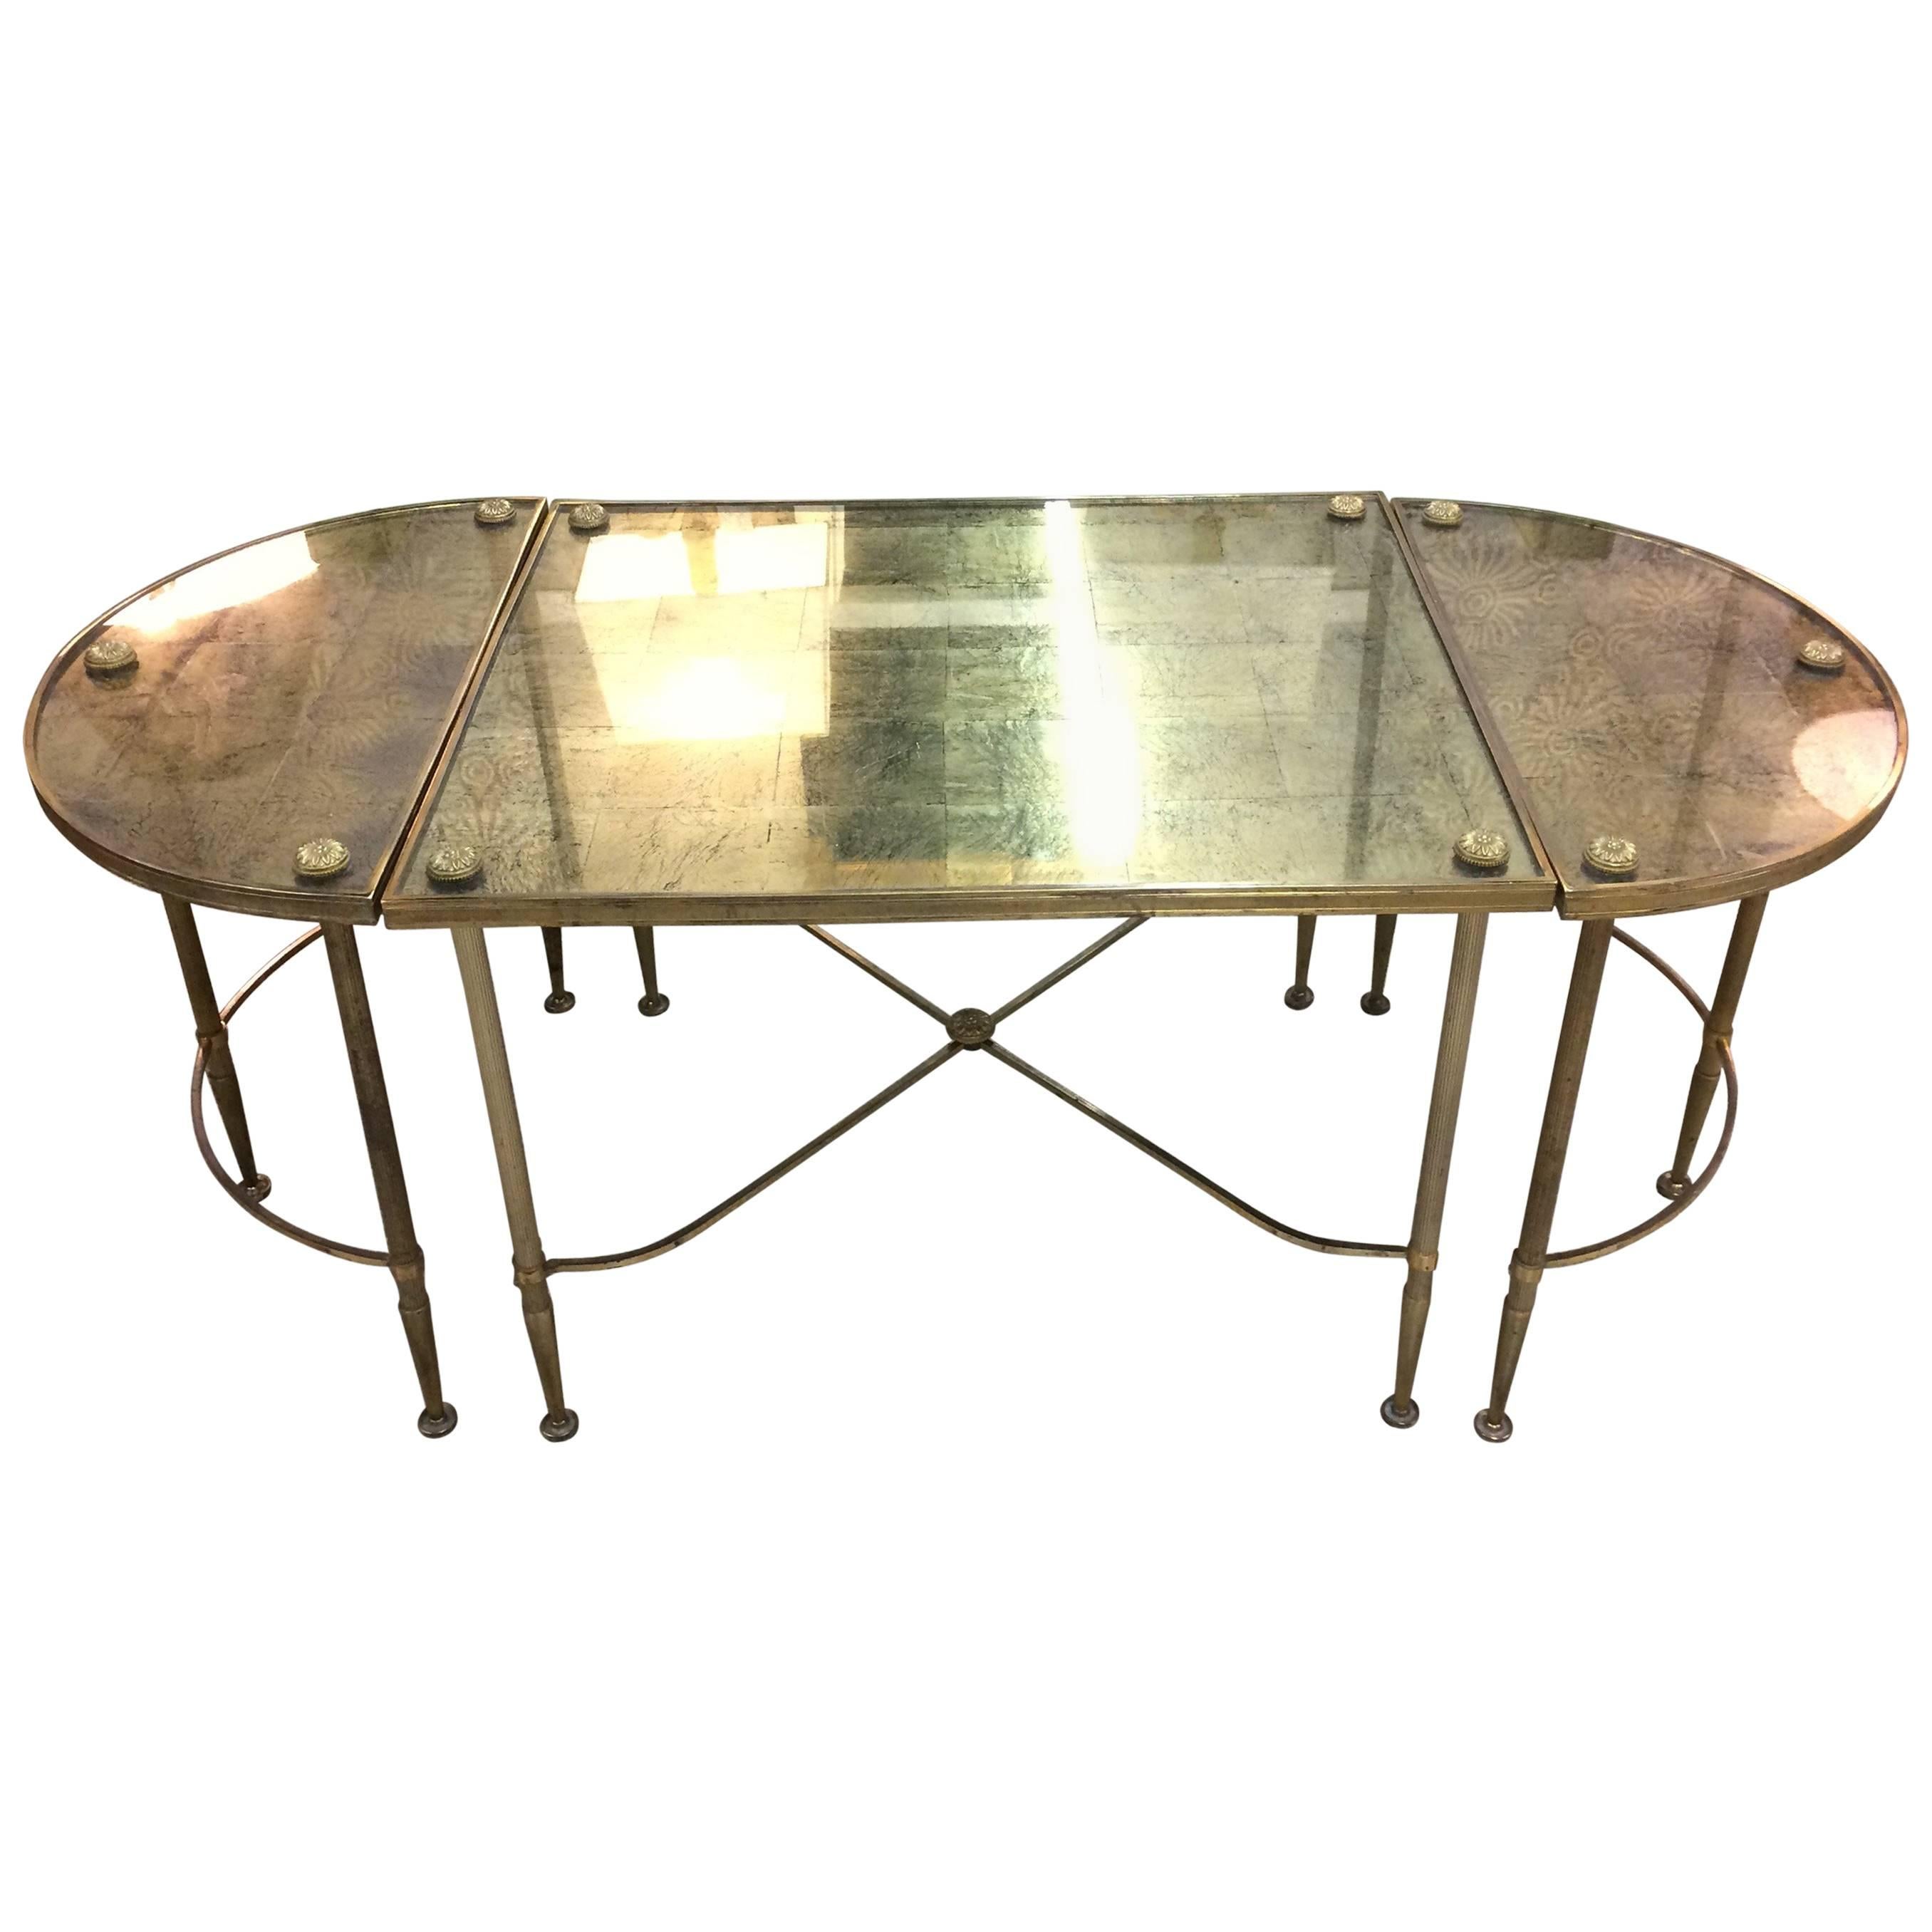 Glamorous Vintage Oblong Gilded Coffee Table